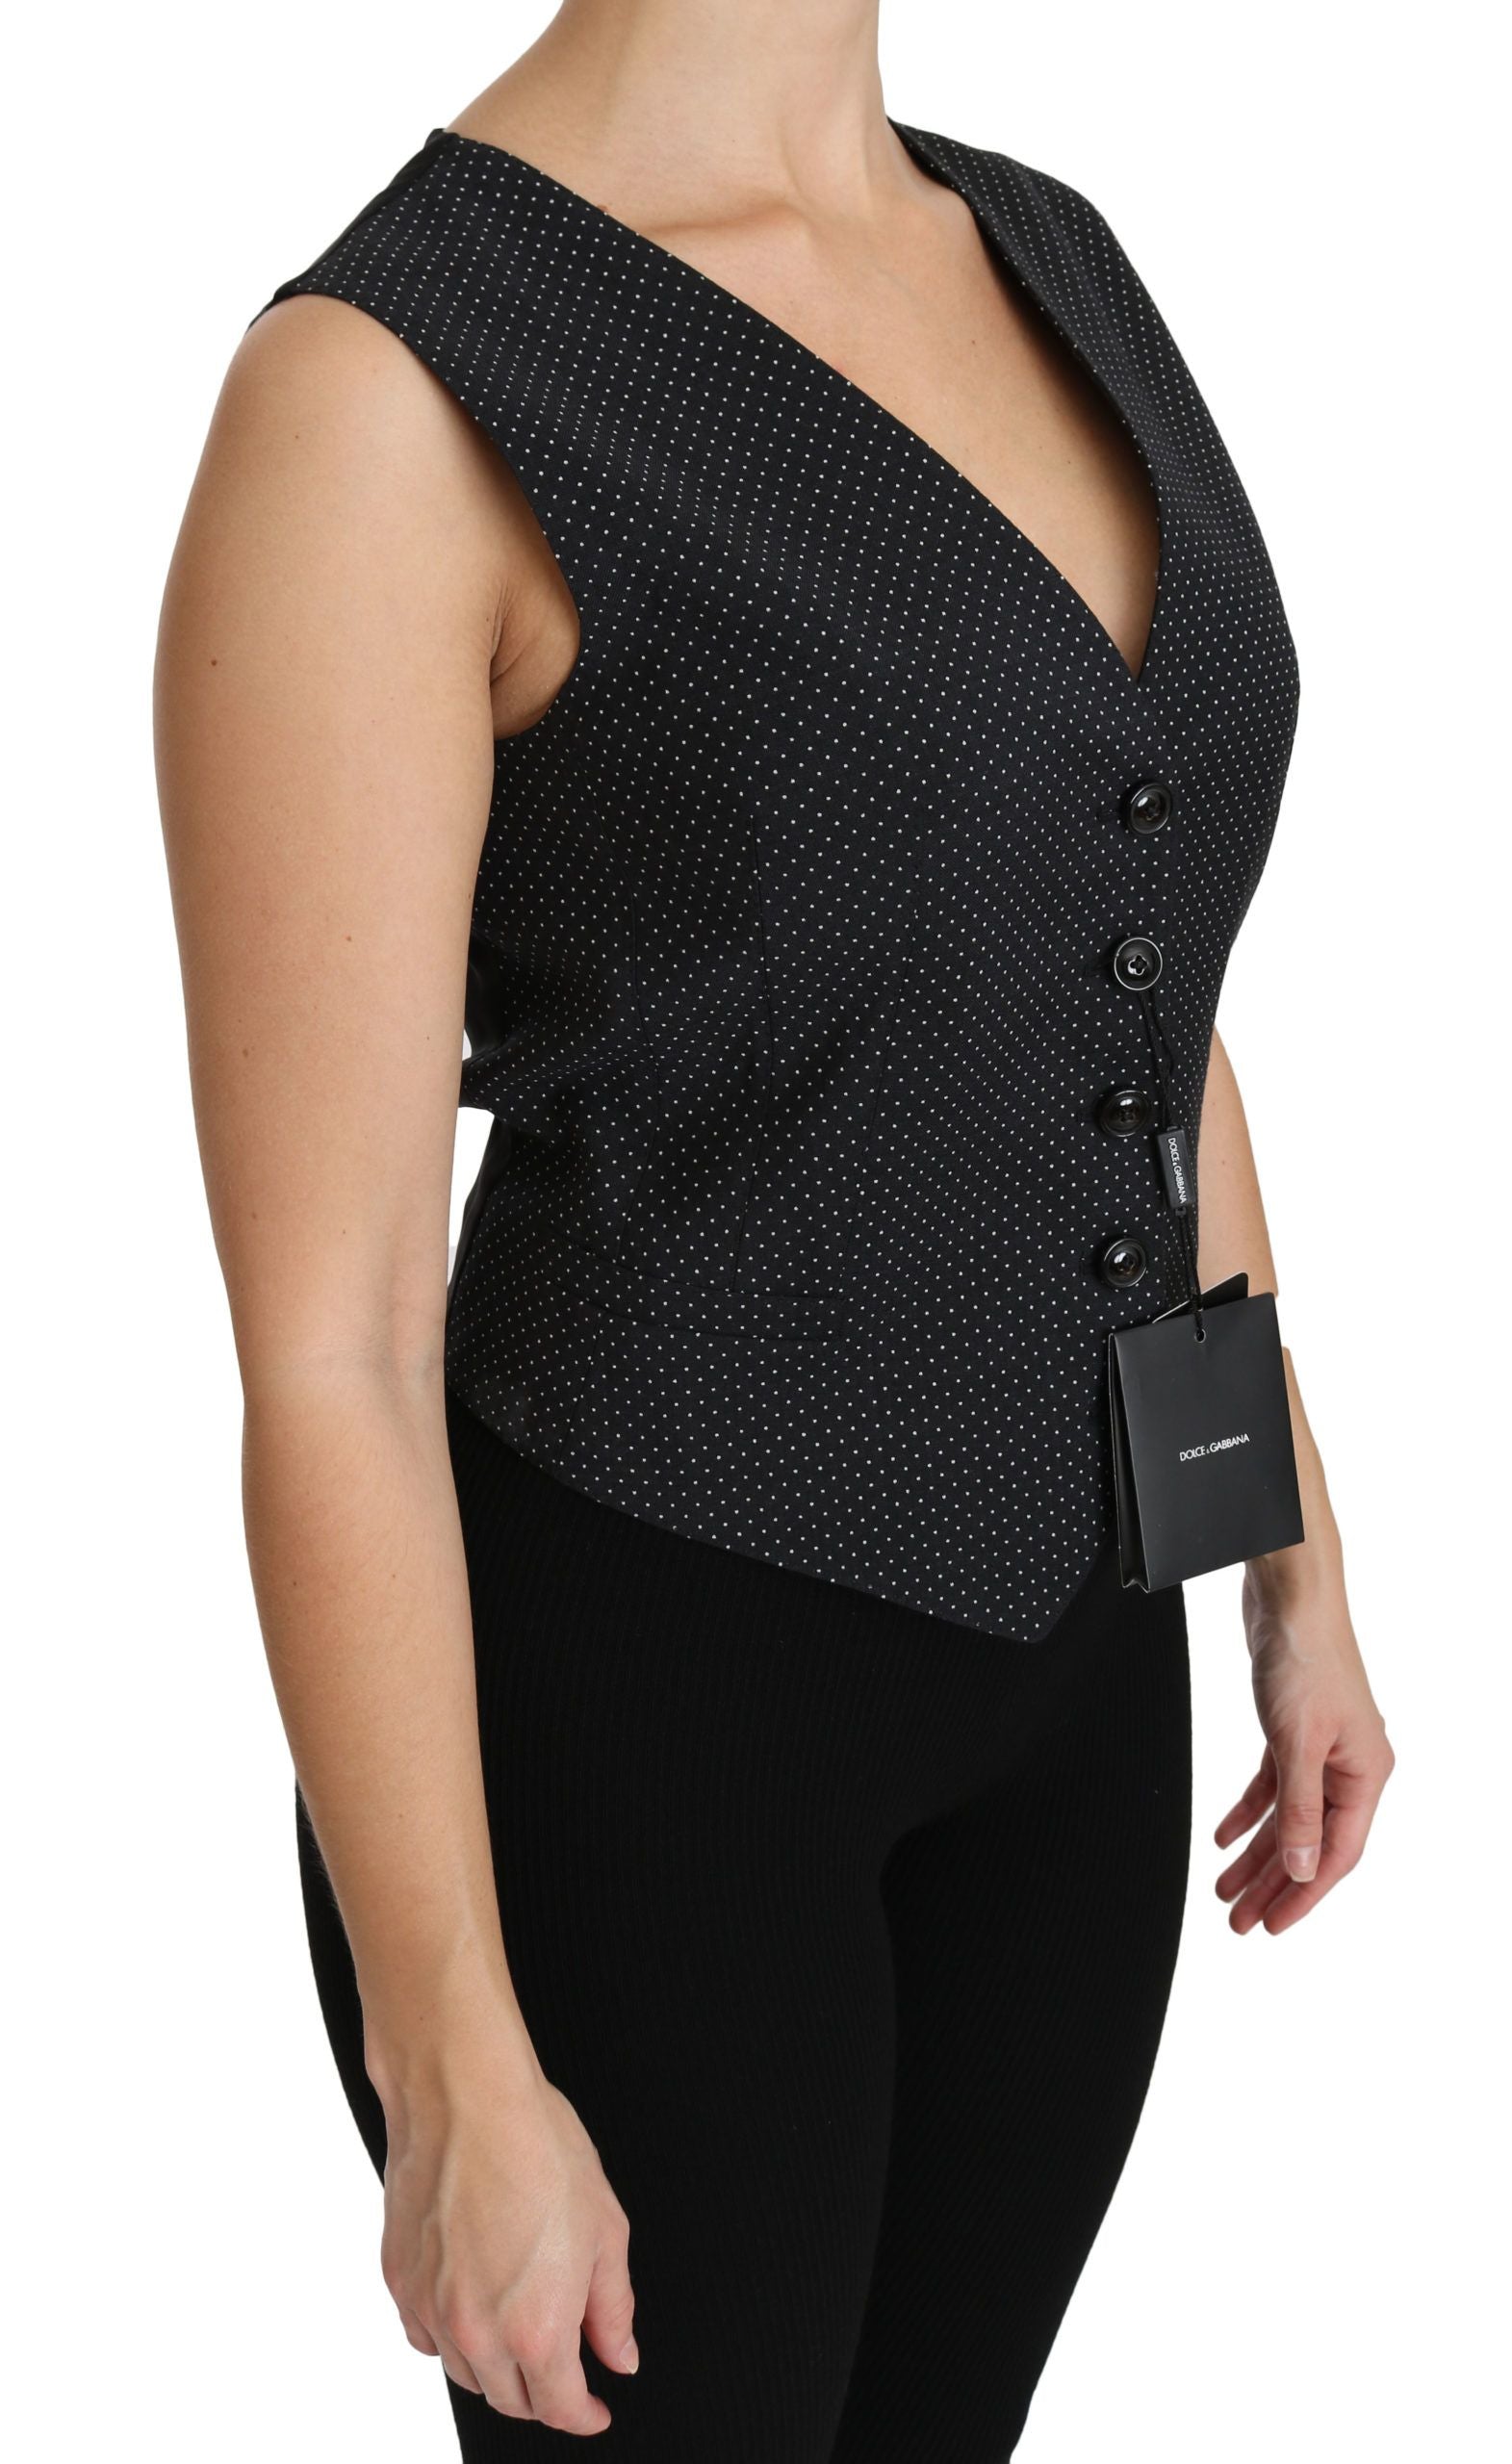 Dolce & Gabbana Ladies' Black Dotted Waistcoat Vest Blouse Top - Designed by Dolce & Gabbana Available to Buy at a Discounted Price on Moon Behind The Hill Online Designer Discount Store